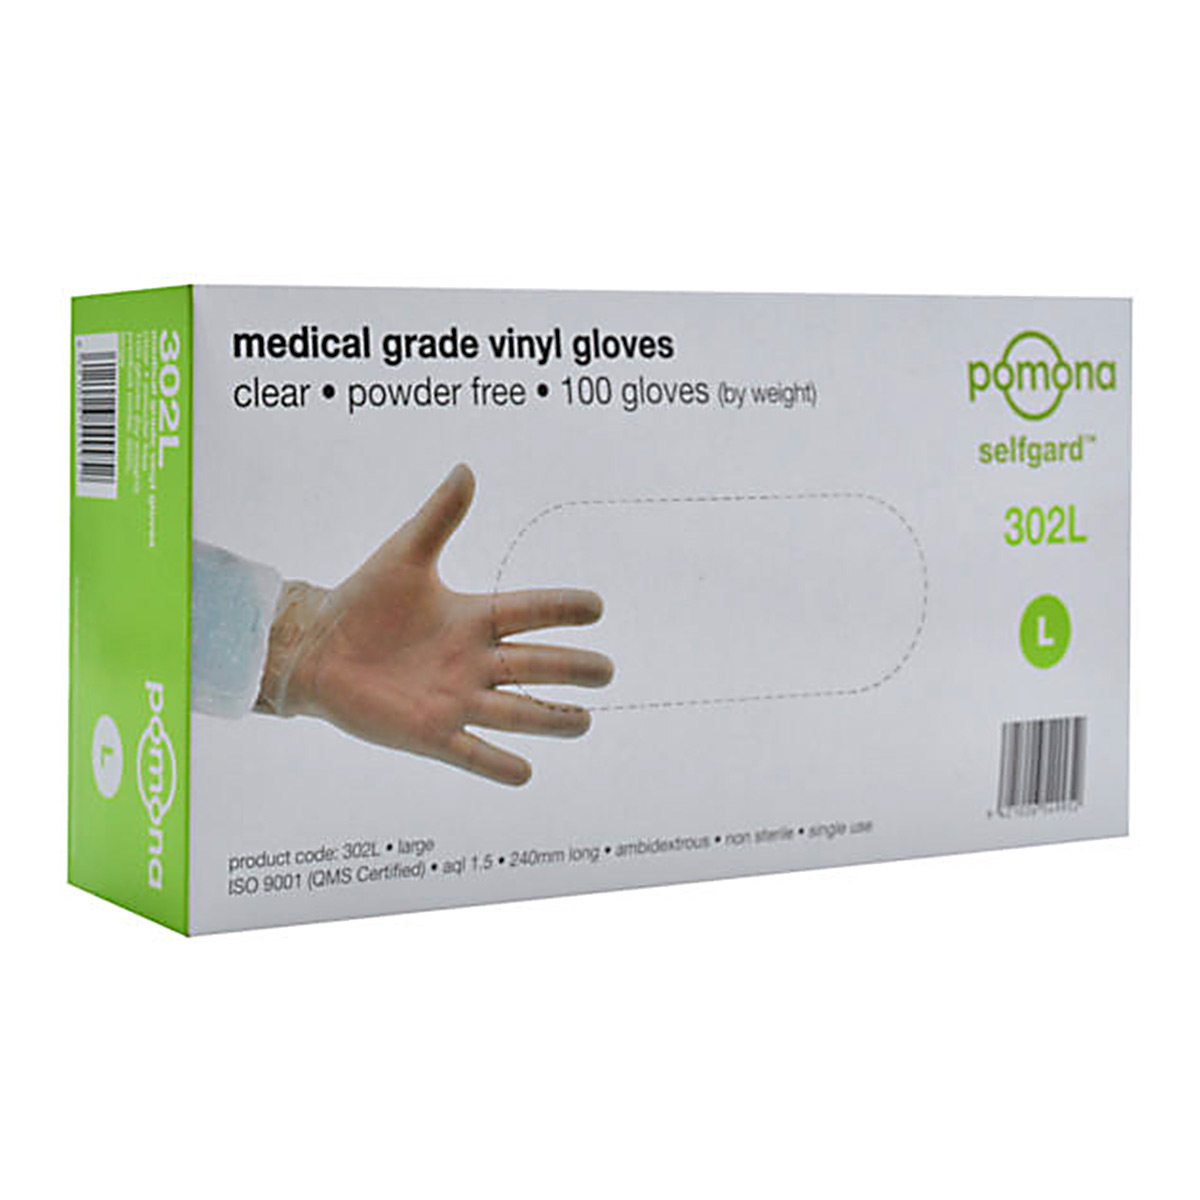 consumables-hospitality-gloves-pomona-vinyl-powderfree-glove-MEDIUM-100-pack-food-safe-clear-vinyl-economical-durable-comfortable-janitorial-food-production-food-service-industries-vjs-distributors-302M